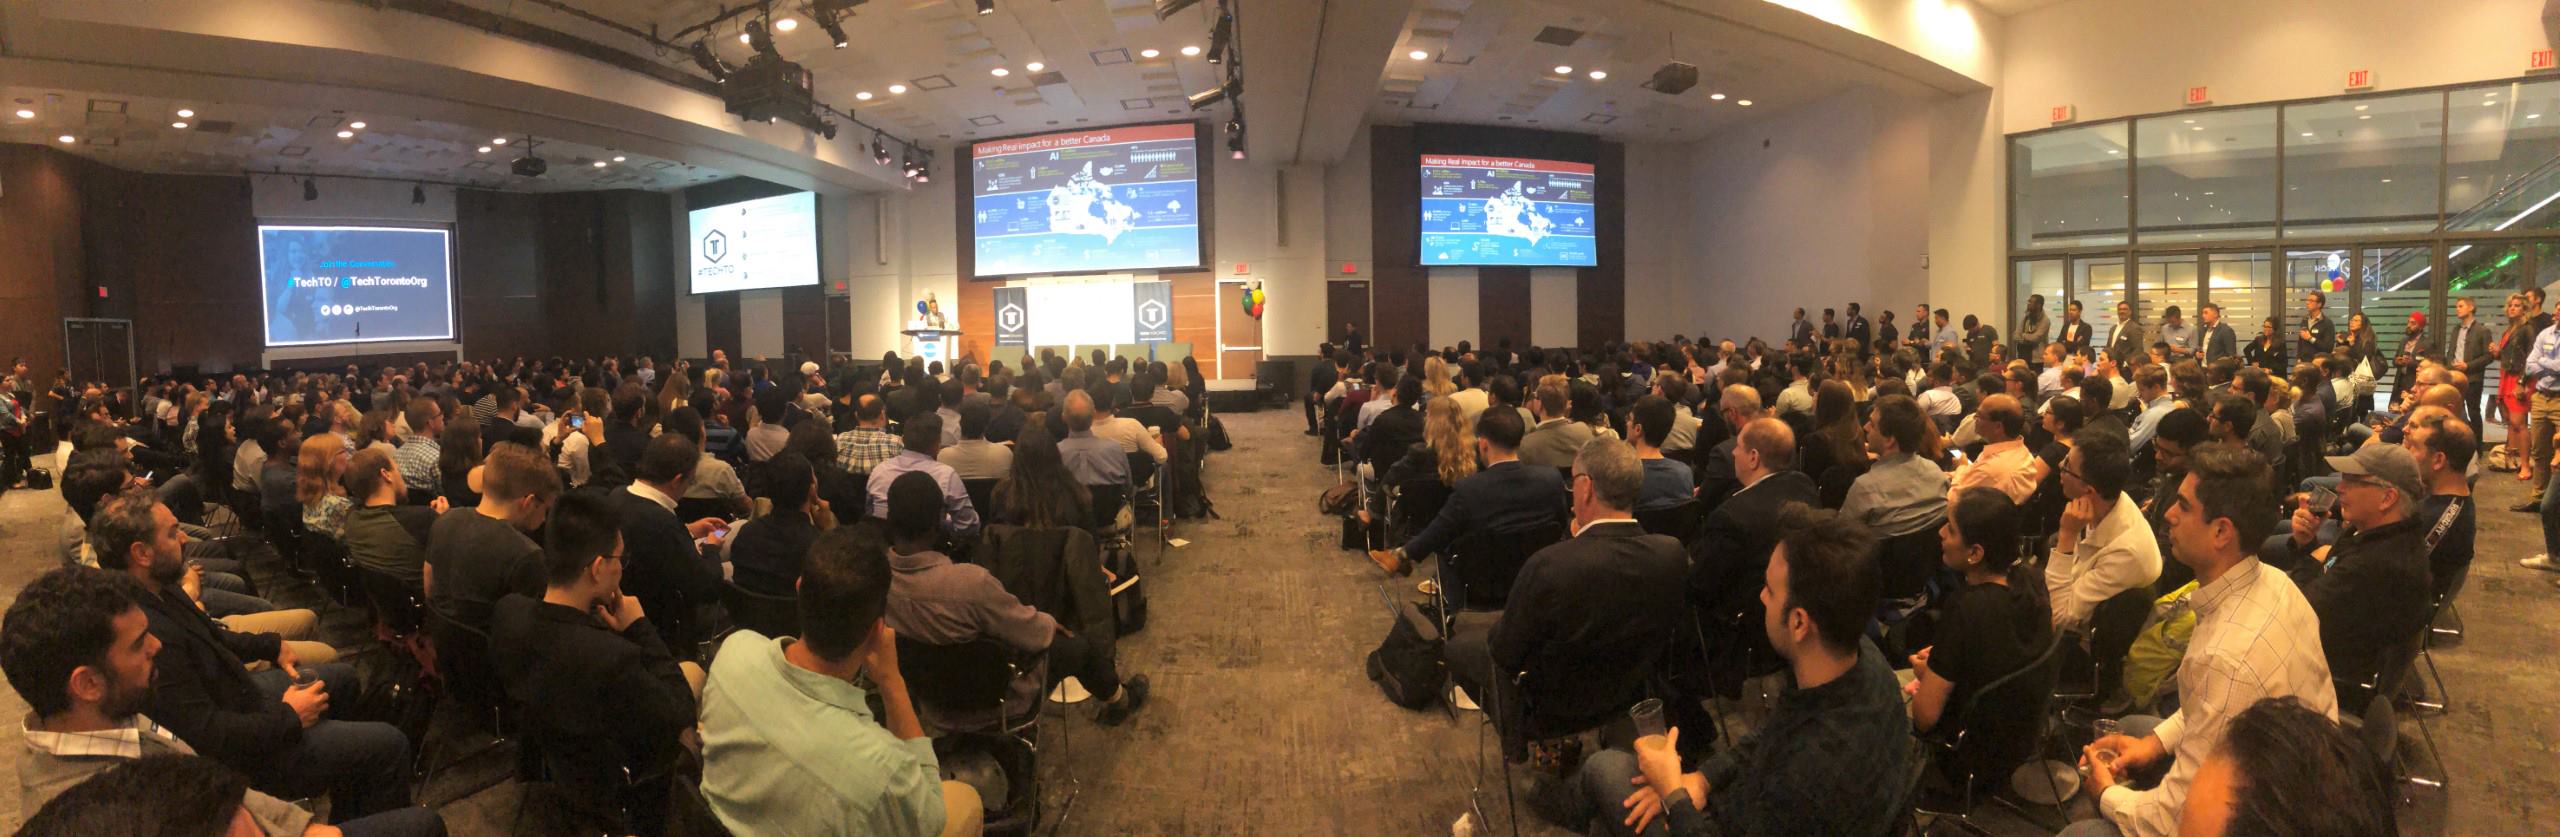 A photograph of the big audience attending the Microsoft AI event